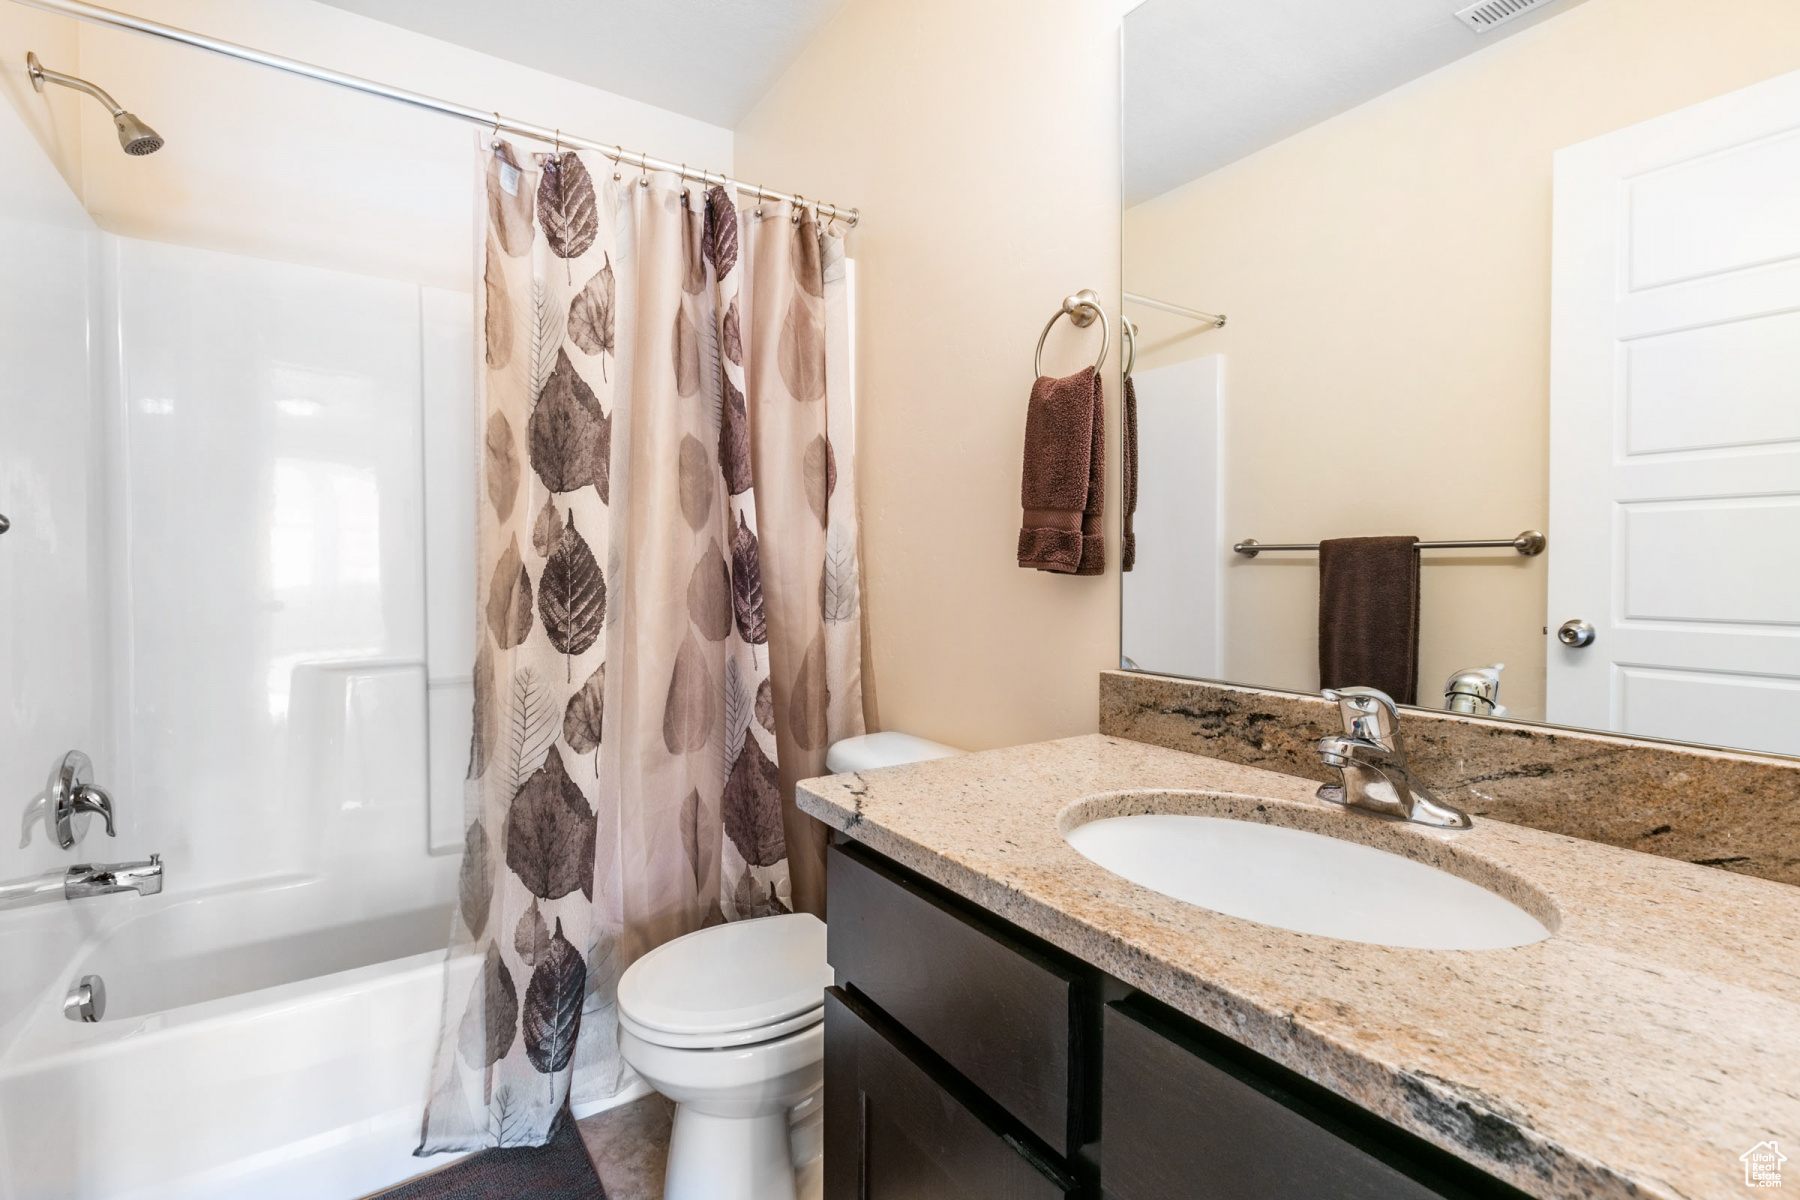 Main bathroom with nice counter space and tile flooring!